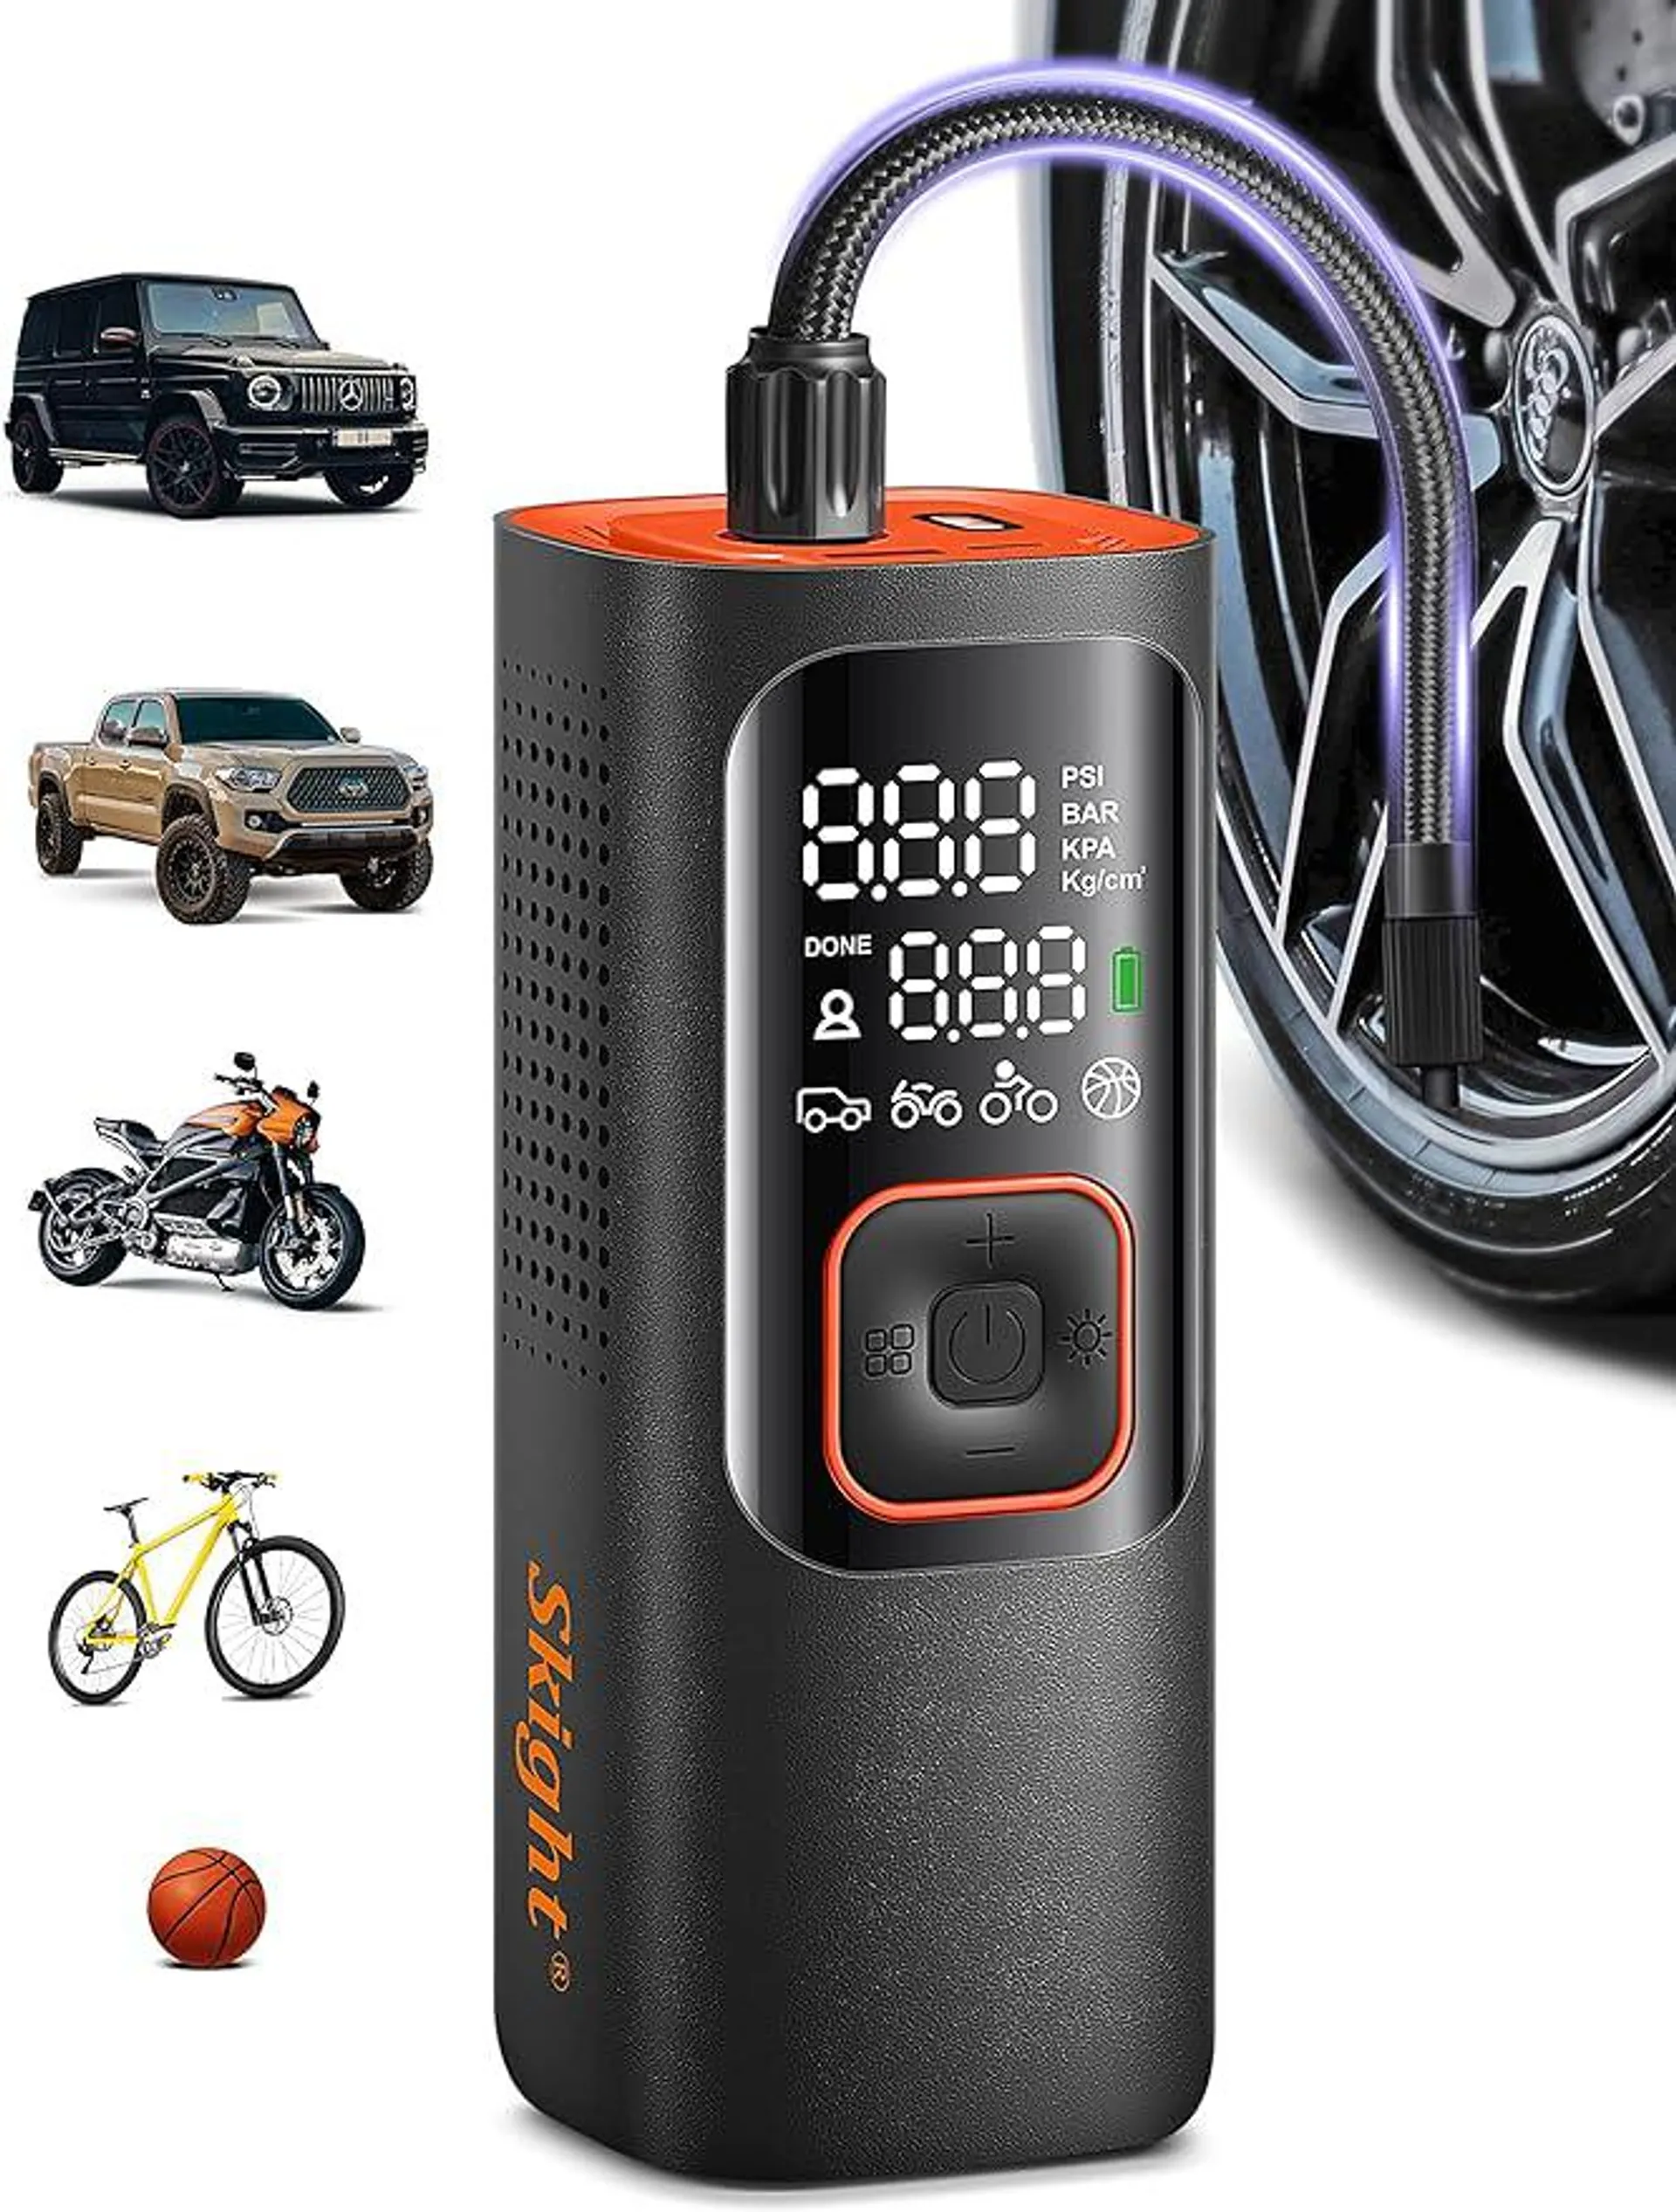 Tire Inflator Portable Air Compressor - Powerful 150PSI & 2X Faster, Accurate Pressure LCD Display, Cordless Easy Operation - Portable Air Pump for Car, Motorcycle, E-Bike, Ball